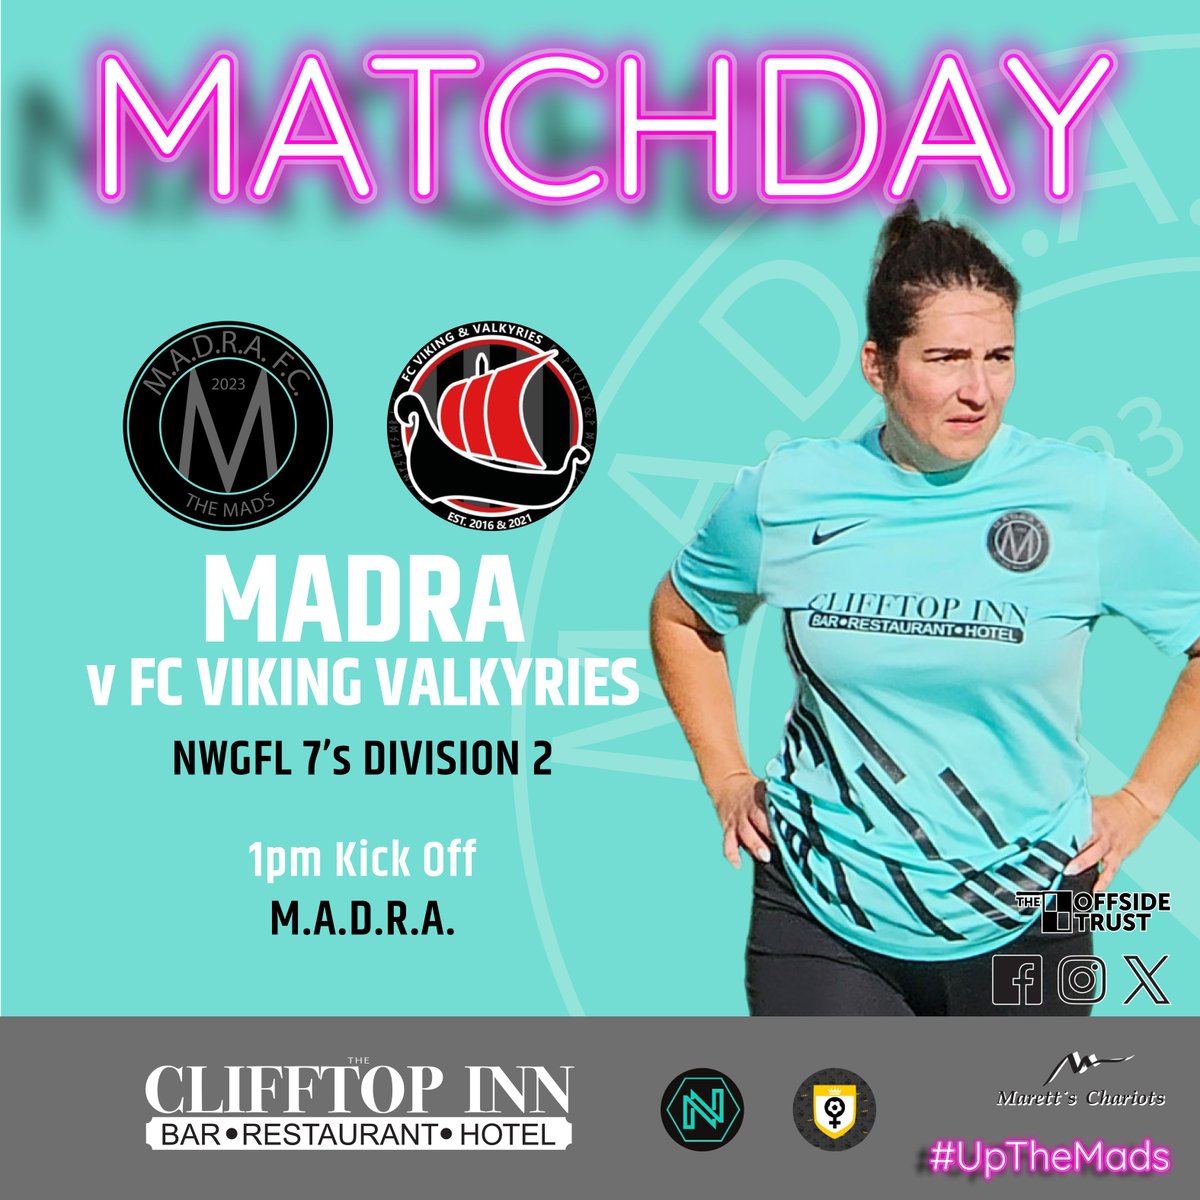 MATCHDAY!
Womens team welcome @vikingvalkyries to M.A.D.R.A.
Bar will be open from Midday
All support is appreciated!
 #UpTheMads #WelcomeToTheMadhouse #Madness #TheMads #MadraFC #NorfolkFootball #OneStepBeyond